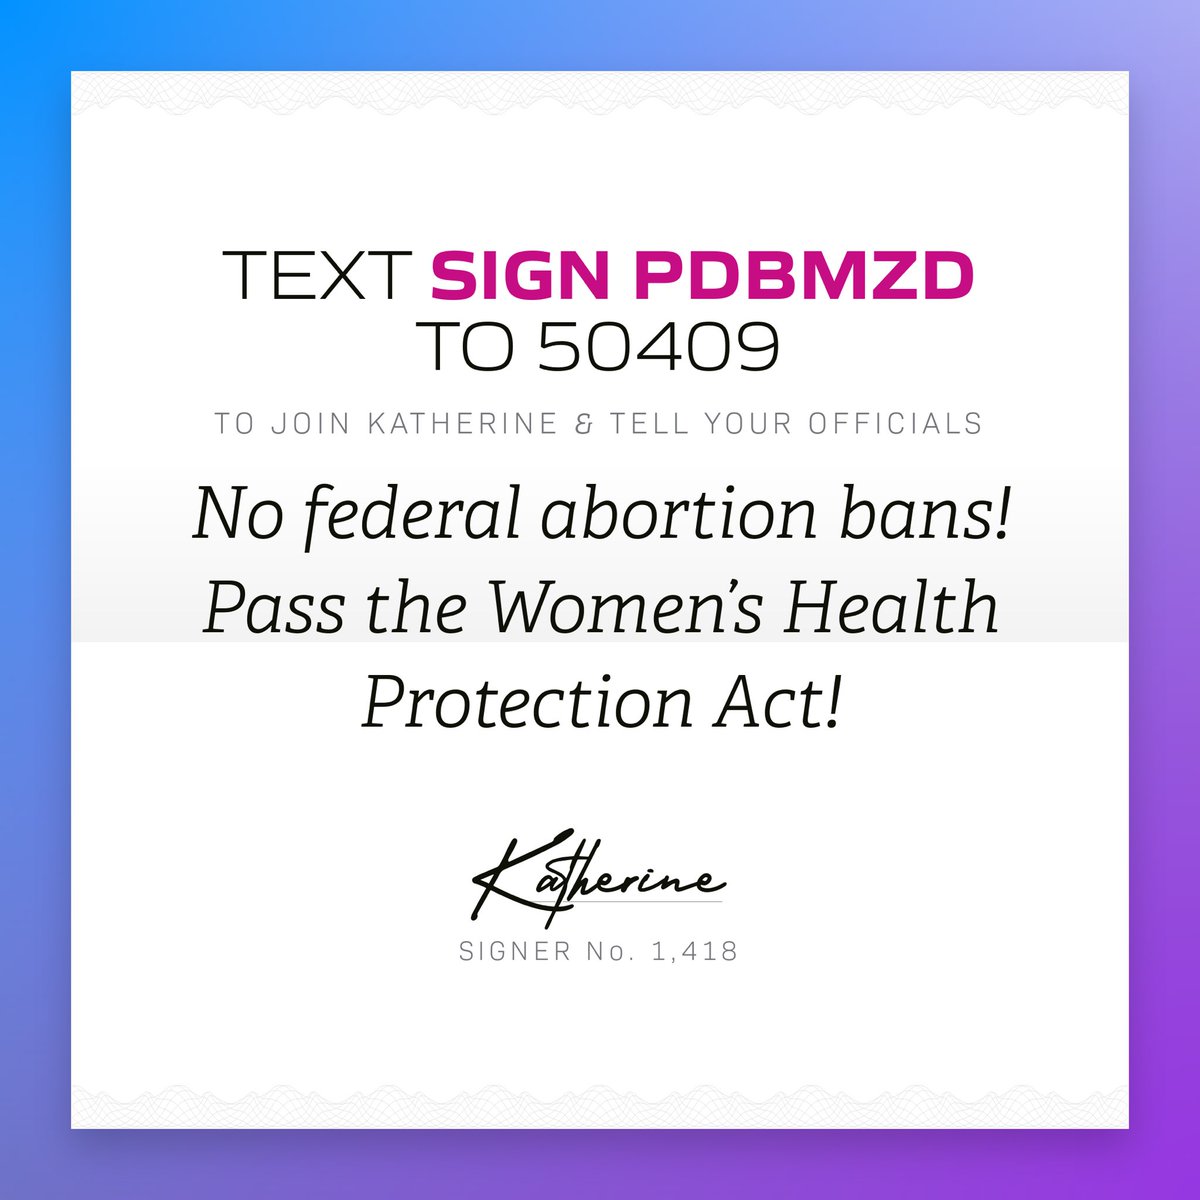 Share share share 
Let’s get this into the algorithm #nofederalabortionban #womenshealthprotectionact #womansrights #AbortionIsHealthcare 

resist.bot/petitions/PDBM…